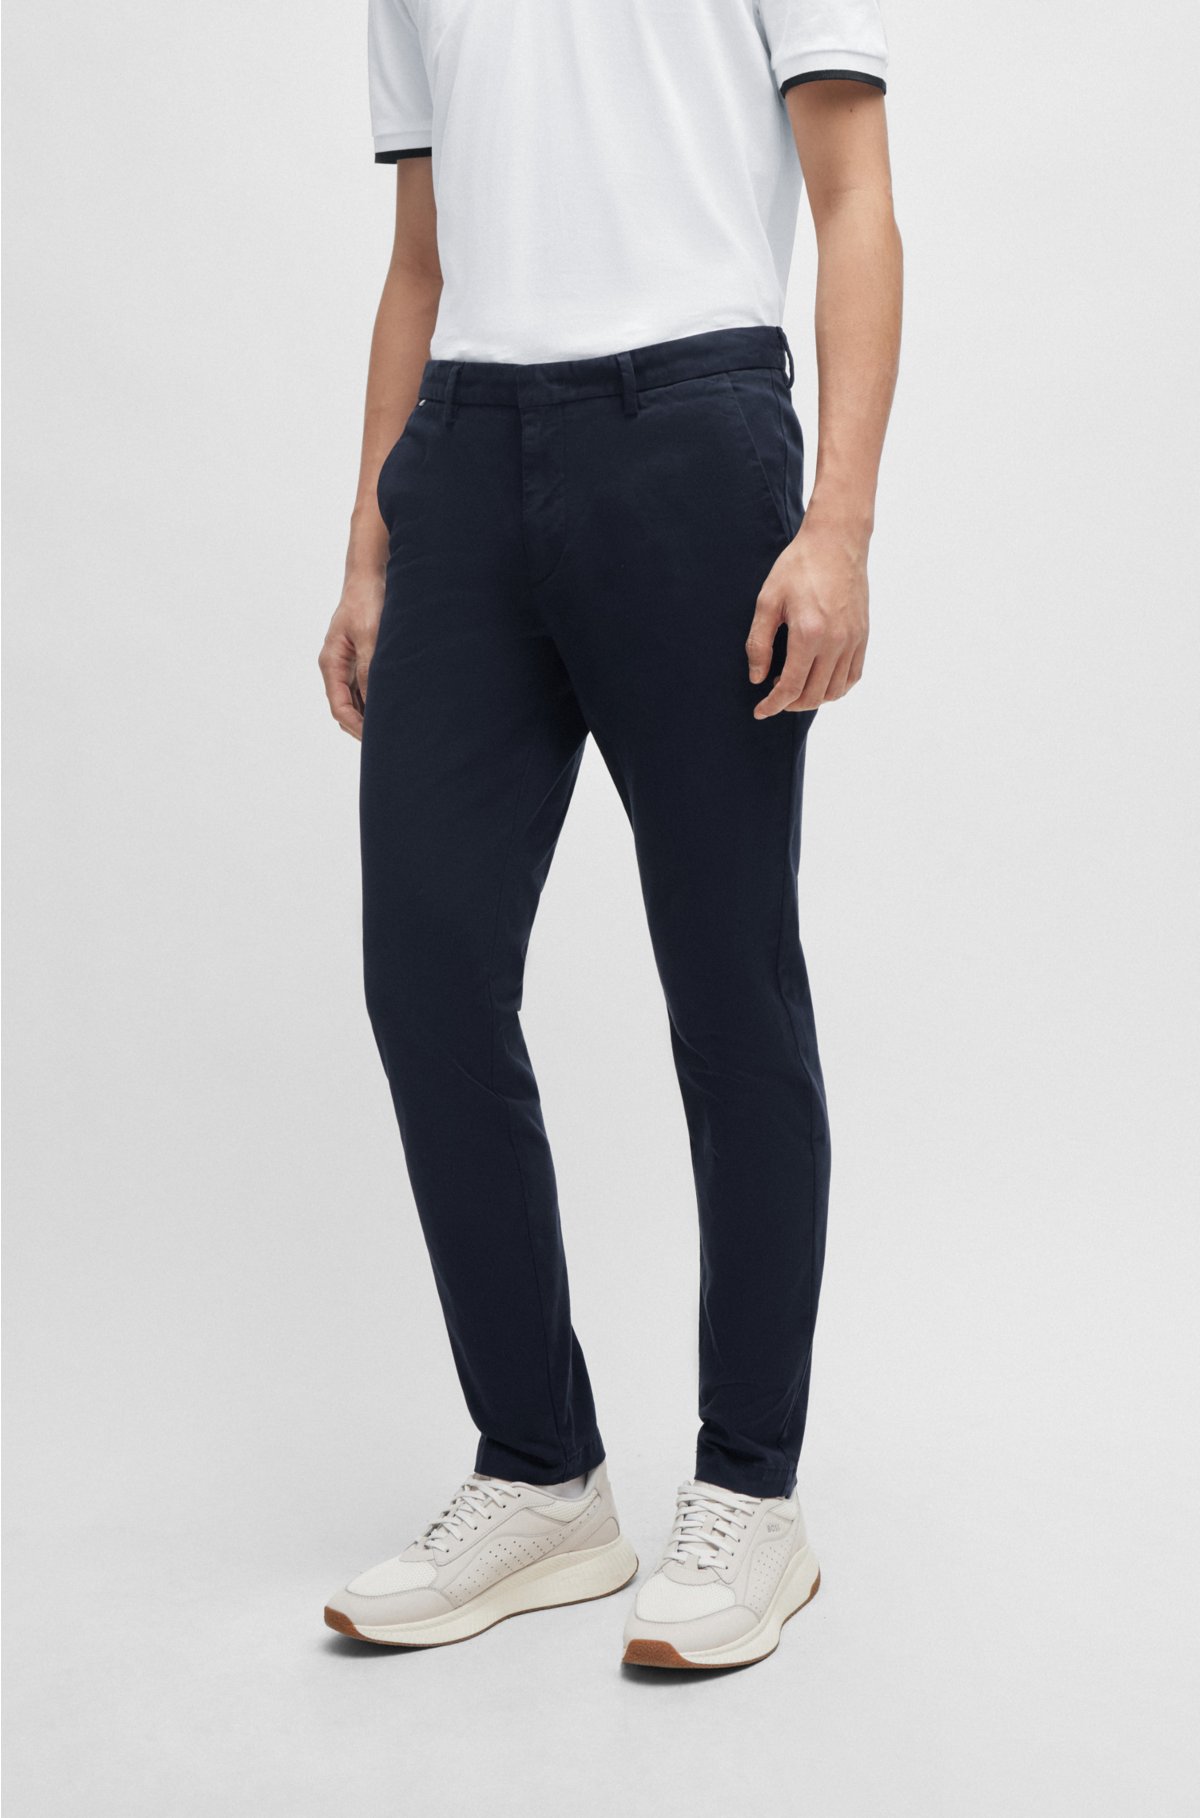 Fitted Pants Black Stretch Cotton Gabardine